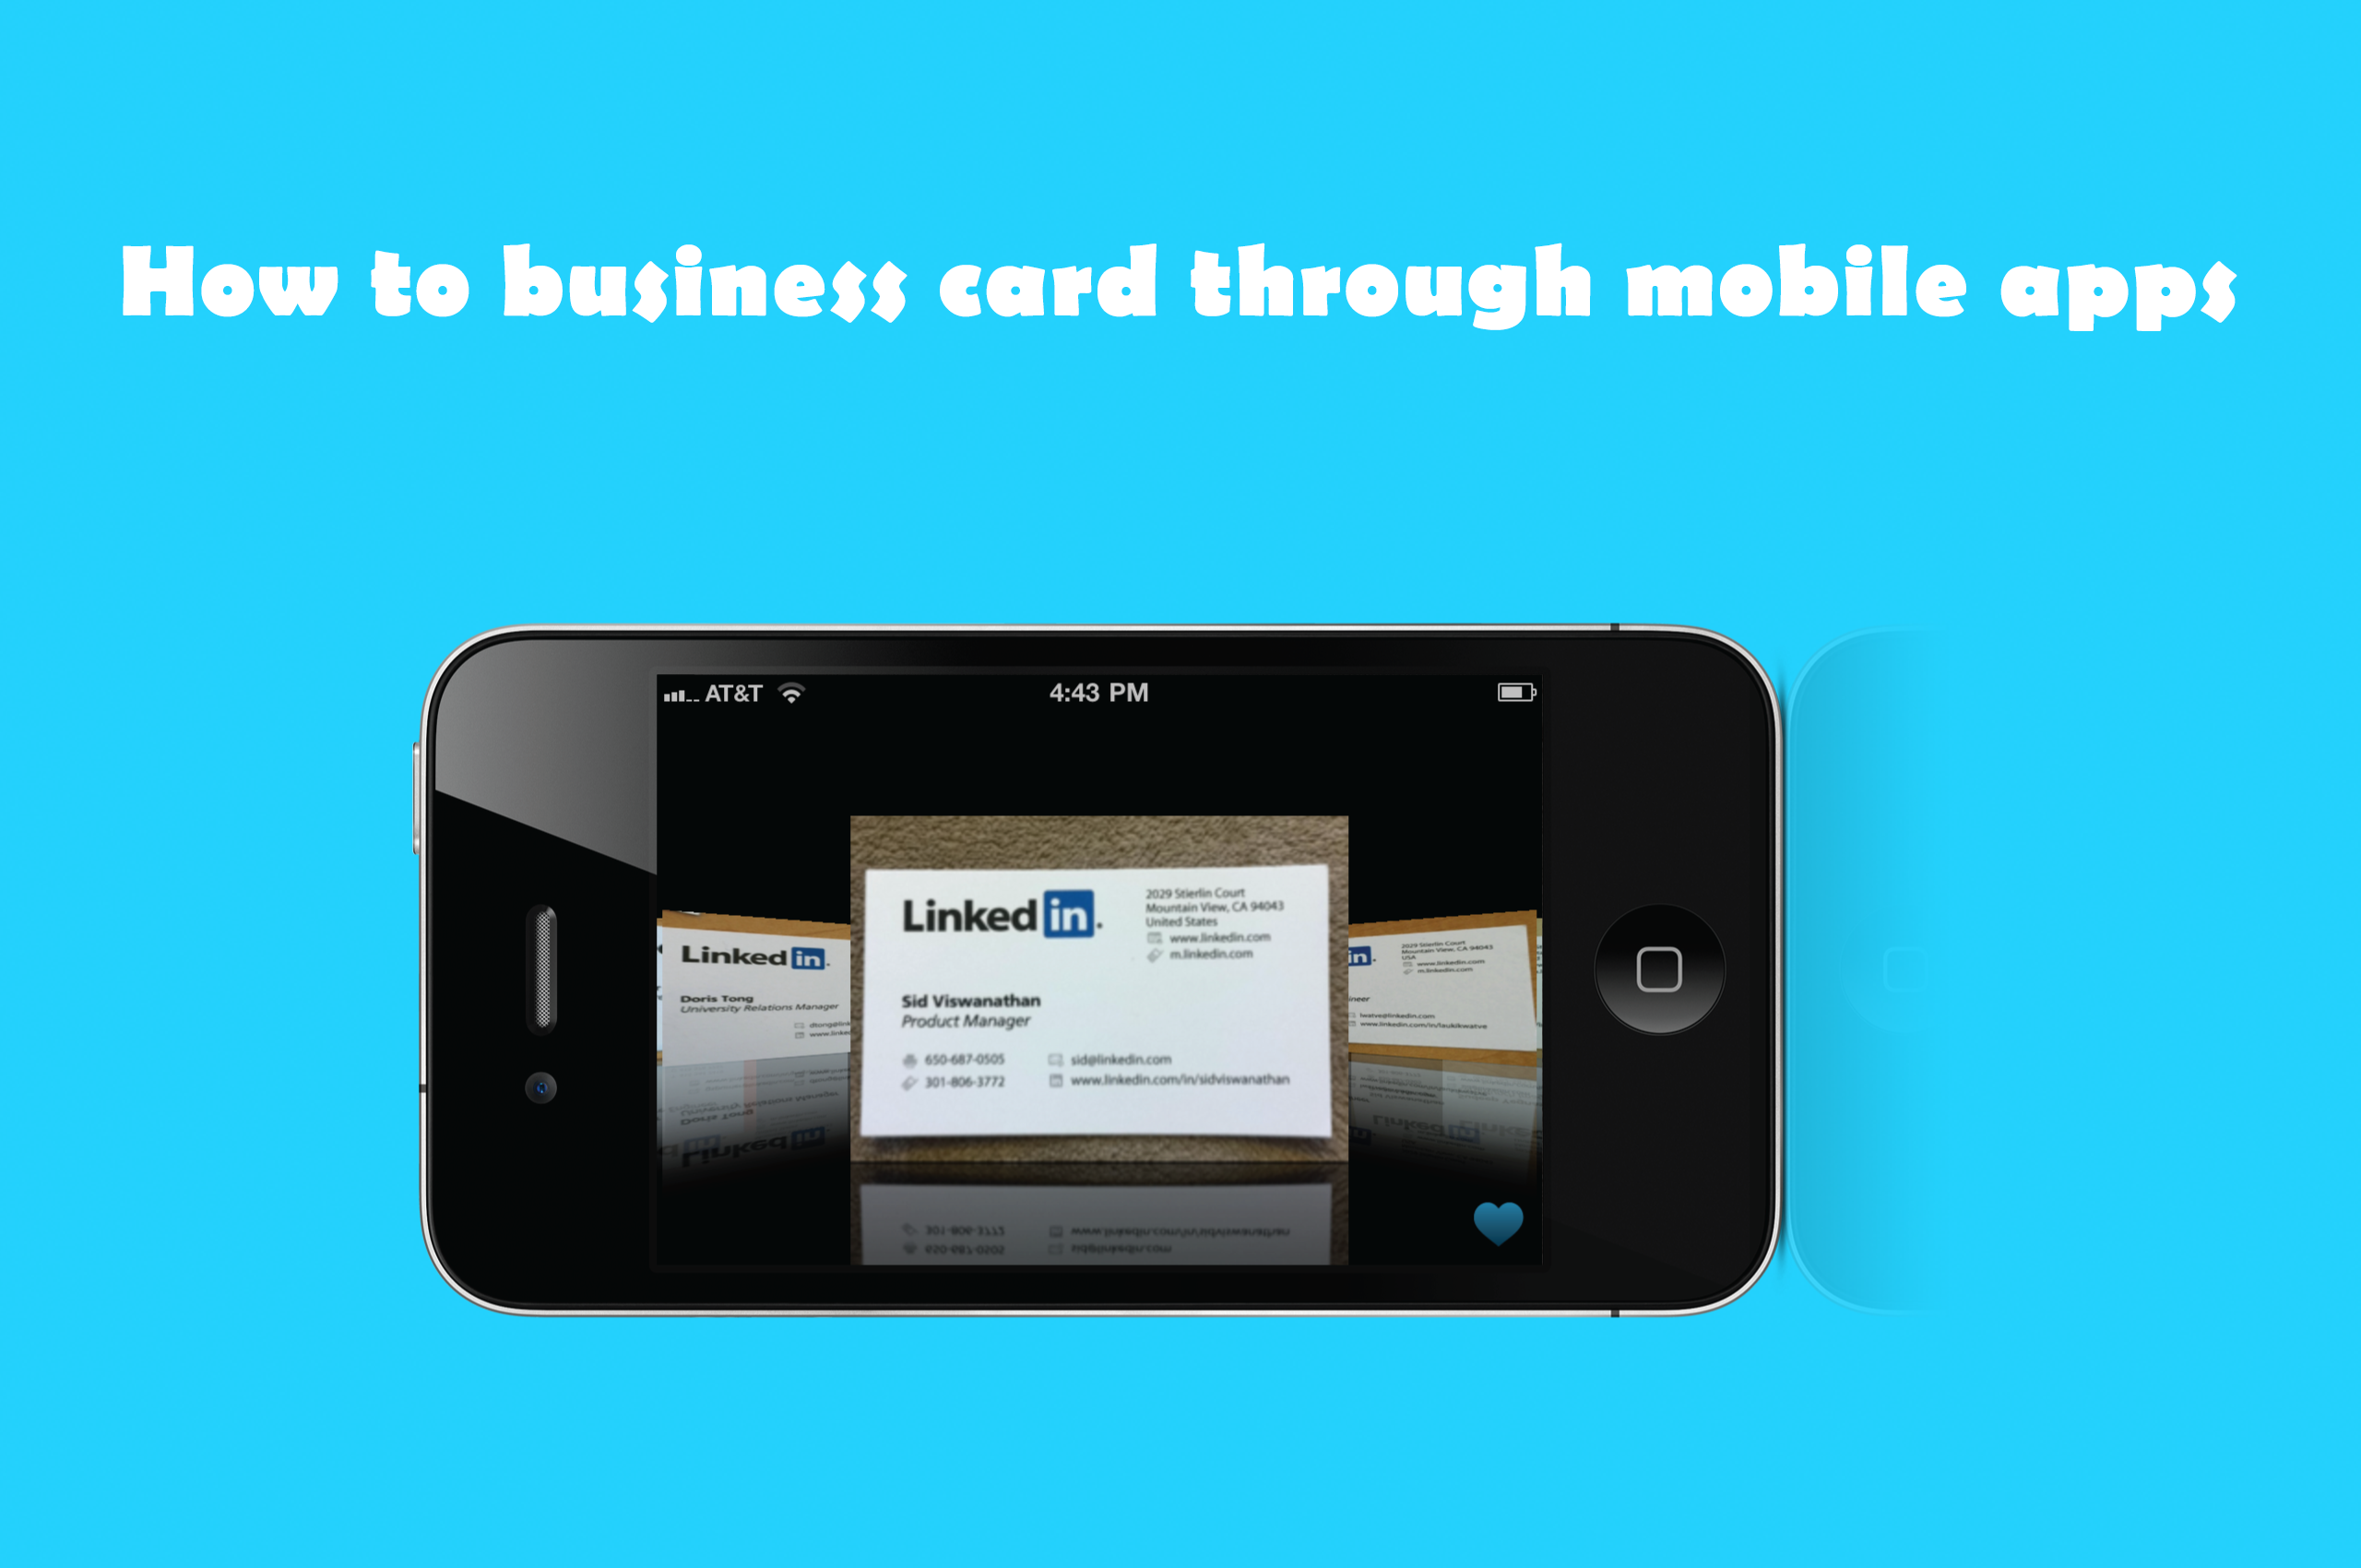 Top 10 Mobile Apps to Create Business Card Apps